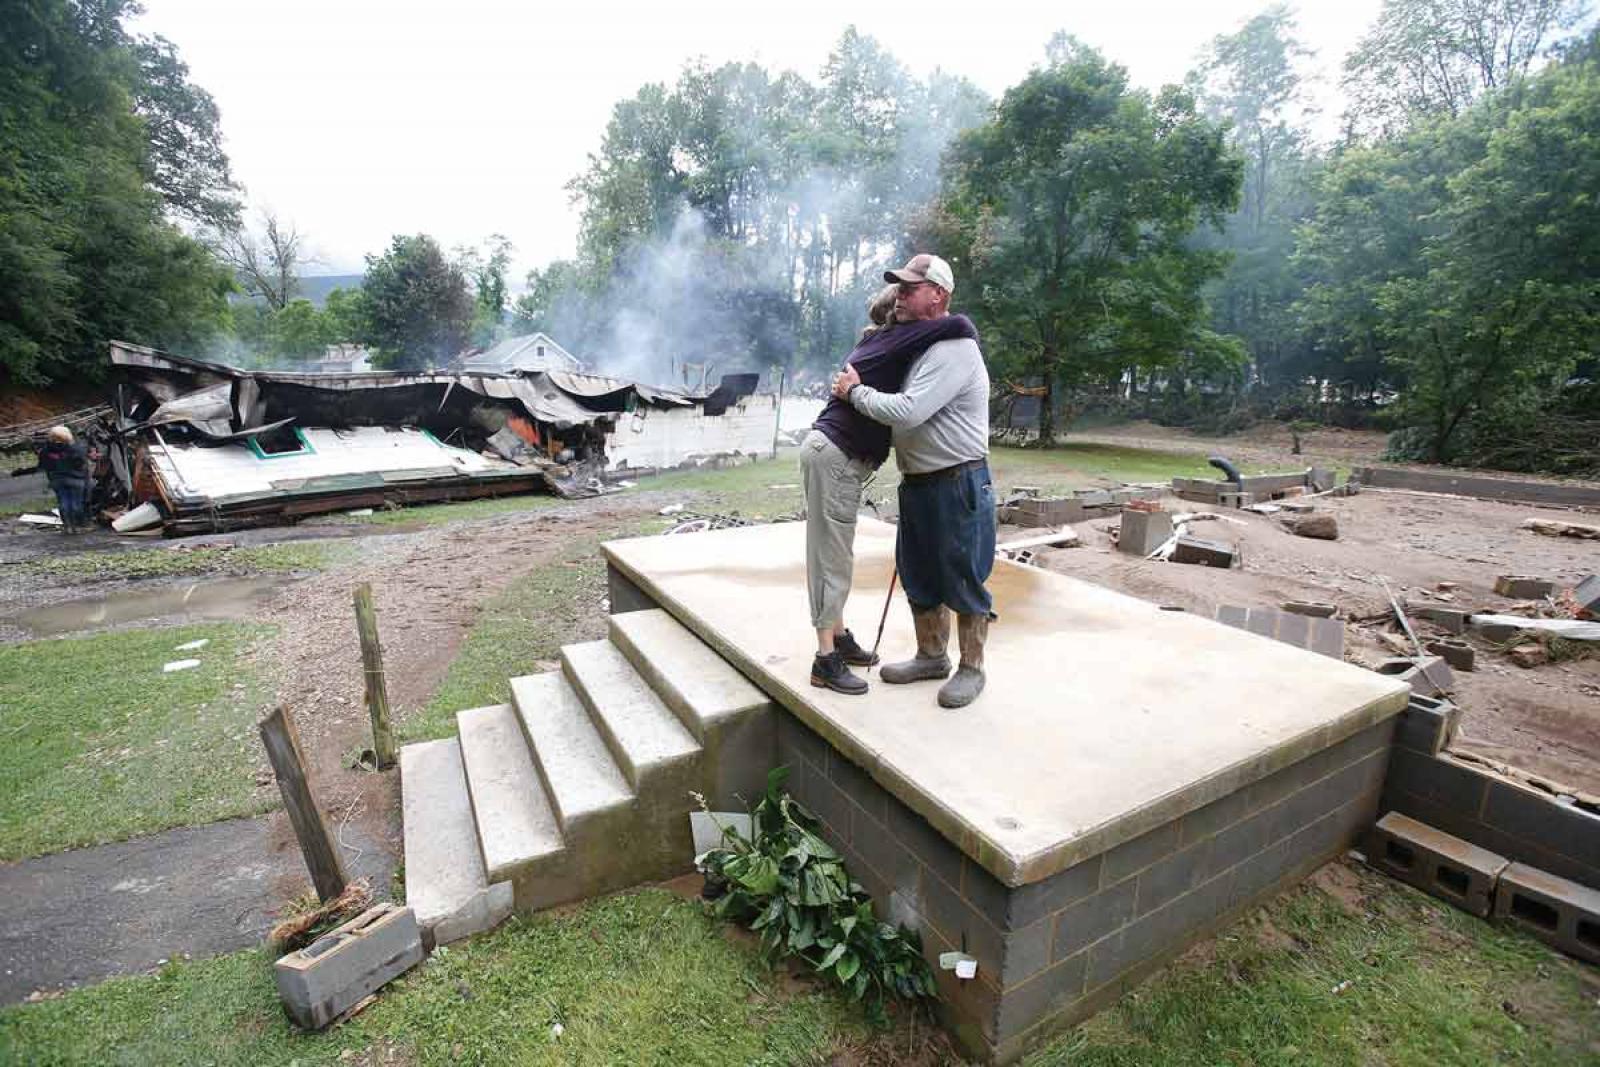 Scene after floods brought hardship to Clay County, West Virginia in 2016